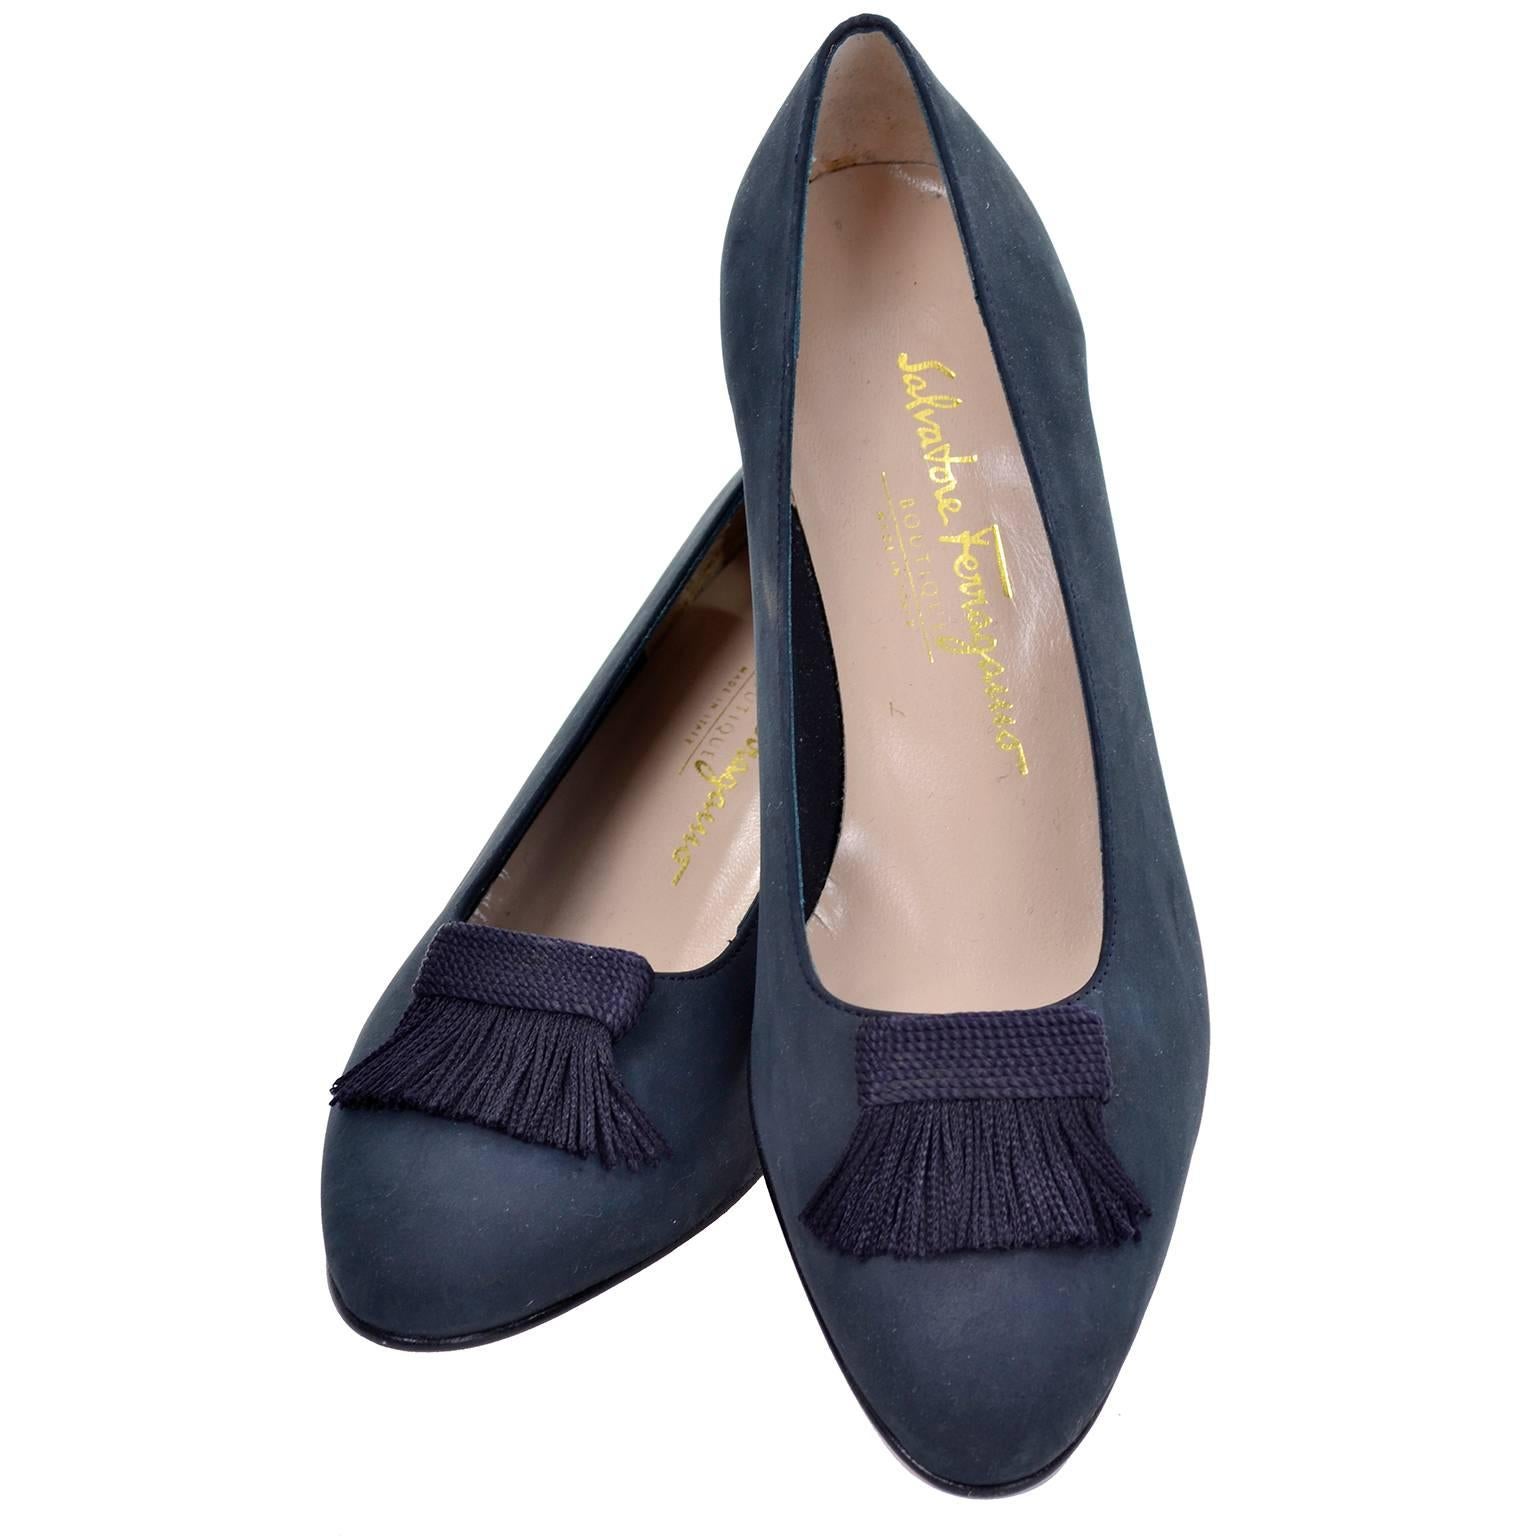 New Vintage Ferragamo Shoes in Navy Blue Suede with Fringed Tassels Size 8B